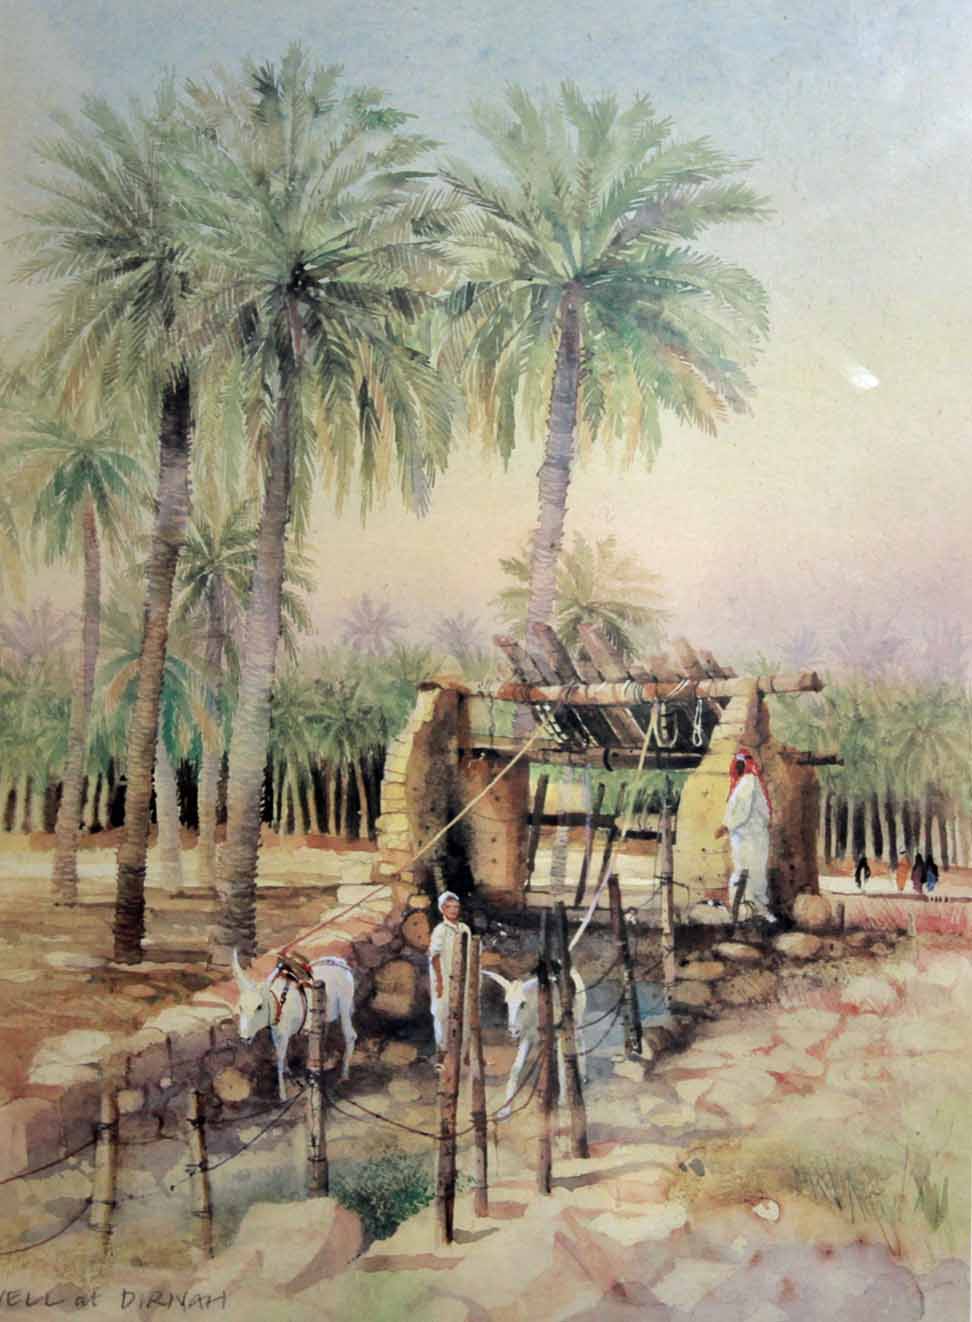 A LIMITED EDITION COLOURED PRINT AFTER SPENCER W. TART, 
"Well at Dirnah," signed in pencil, another